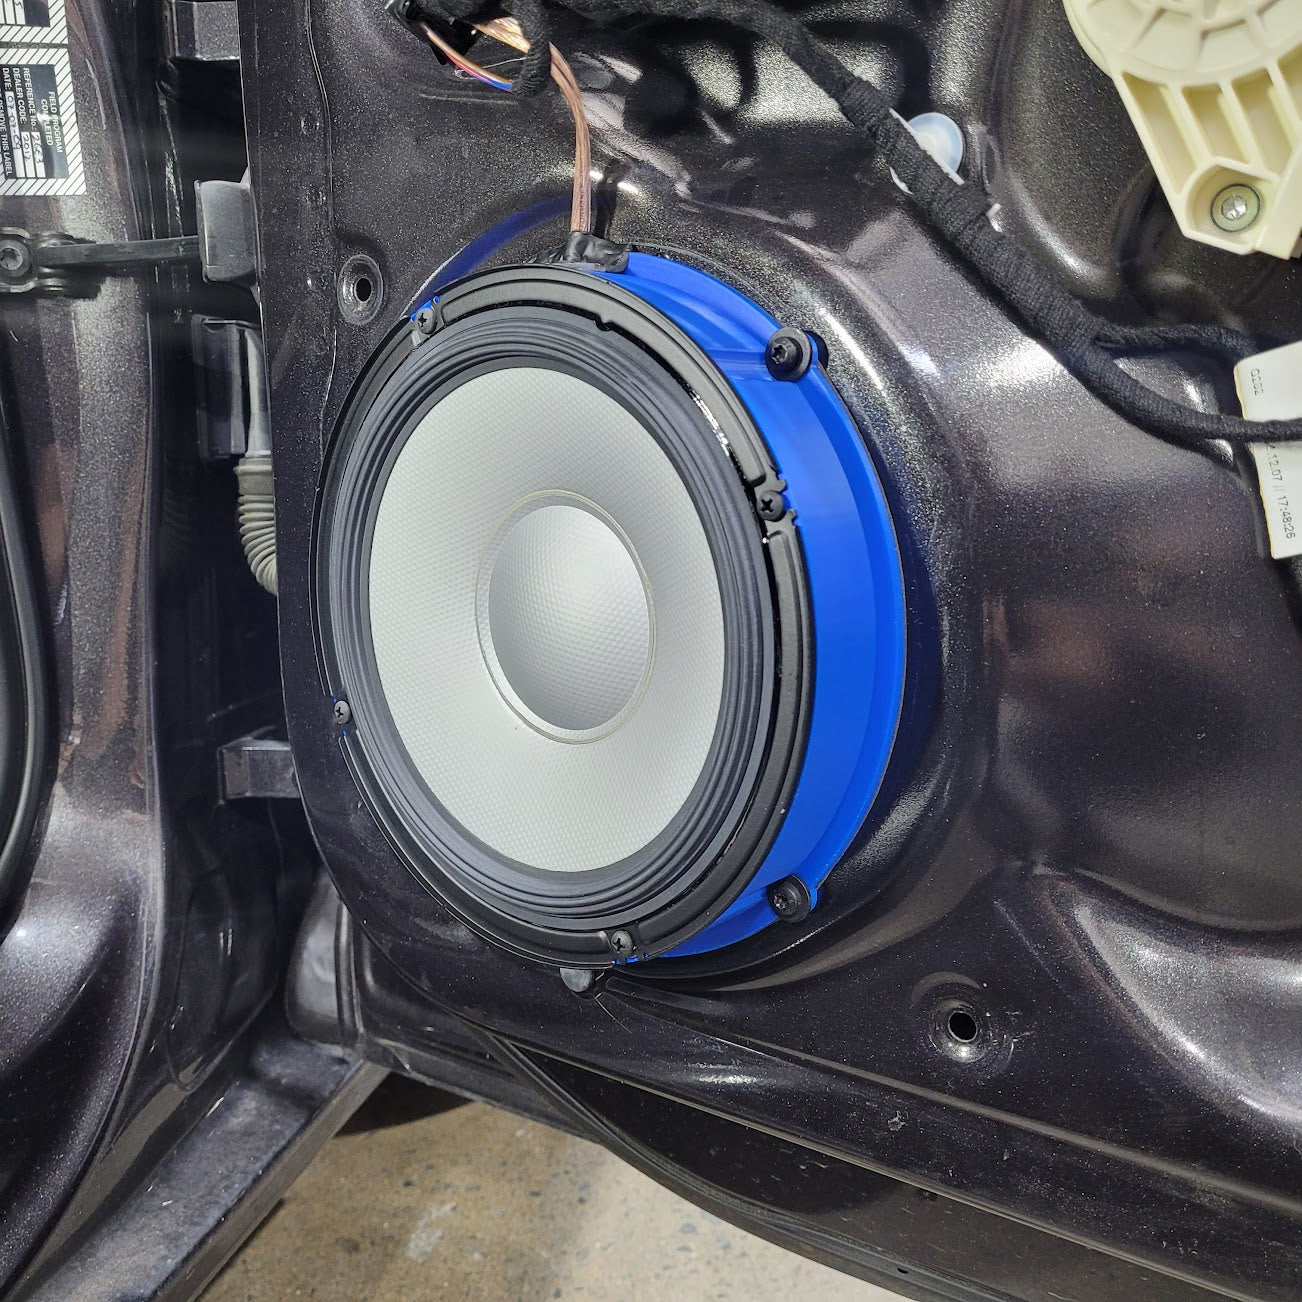 GCCS 8 Inch Speaker Spacers for Audi/VW Group Vehicles